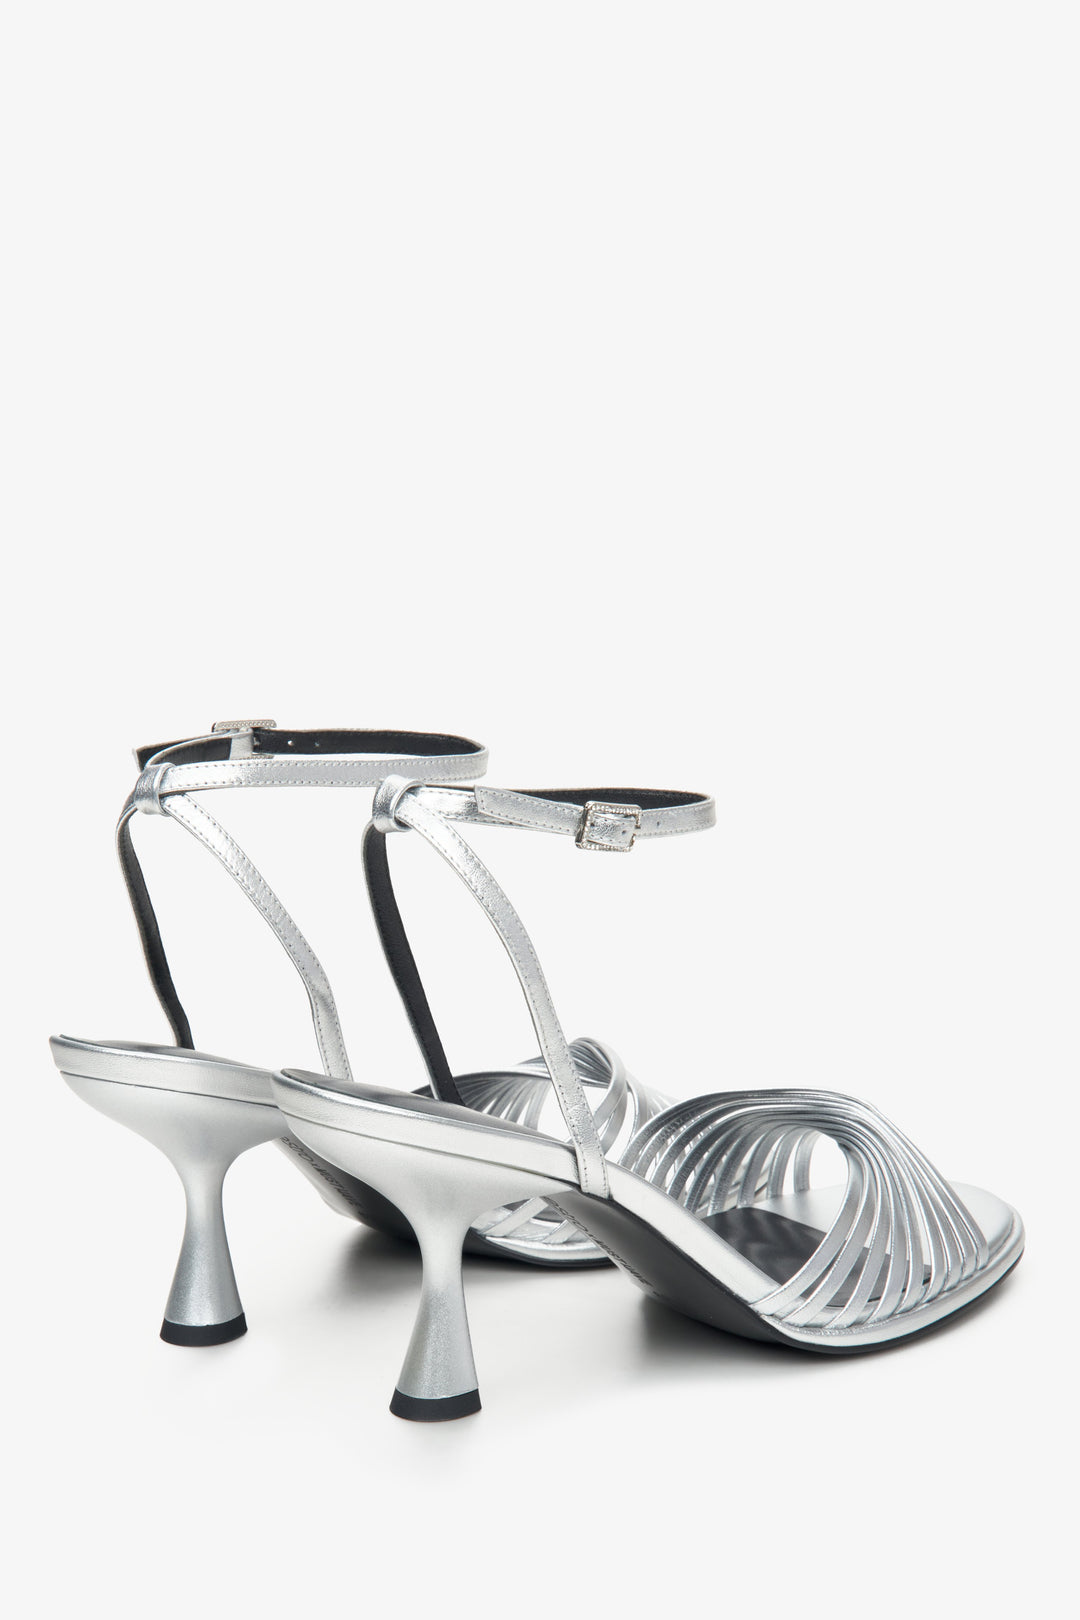 Comfortable silver women's sandals with heels made of genuine leather by Estro x MustHave - close-up on the heel and side line of the shoe.